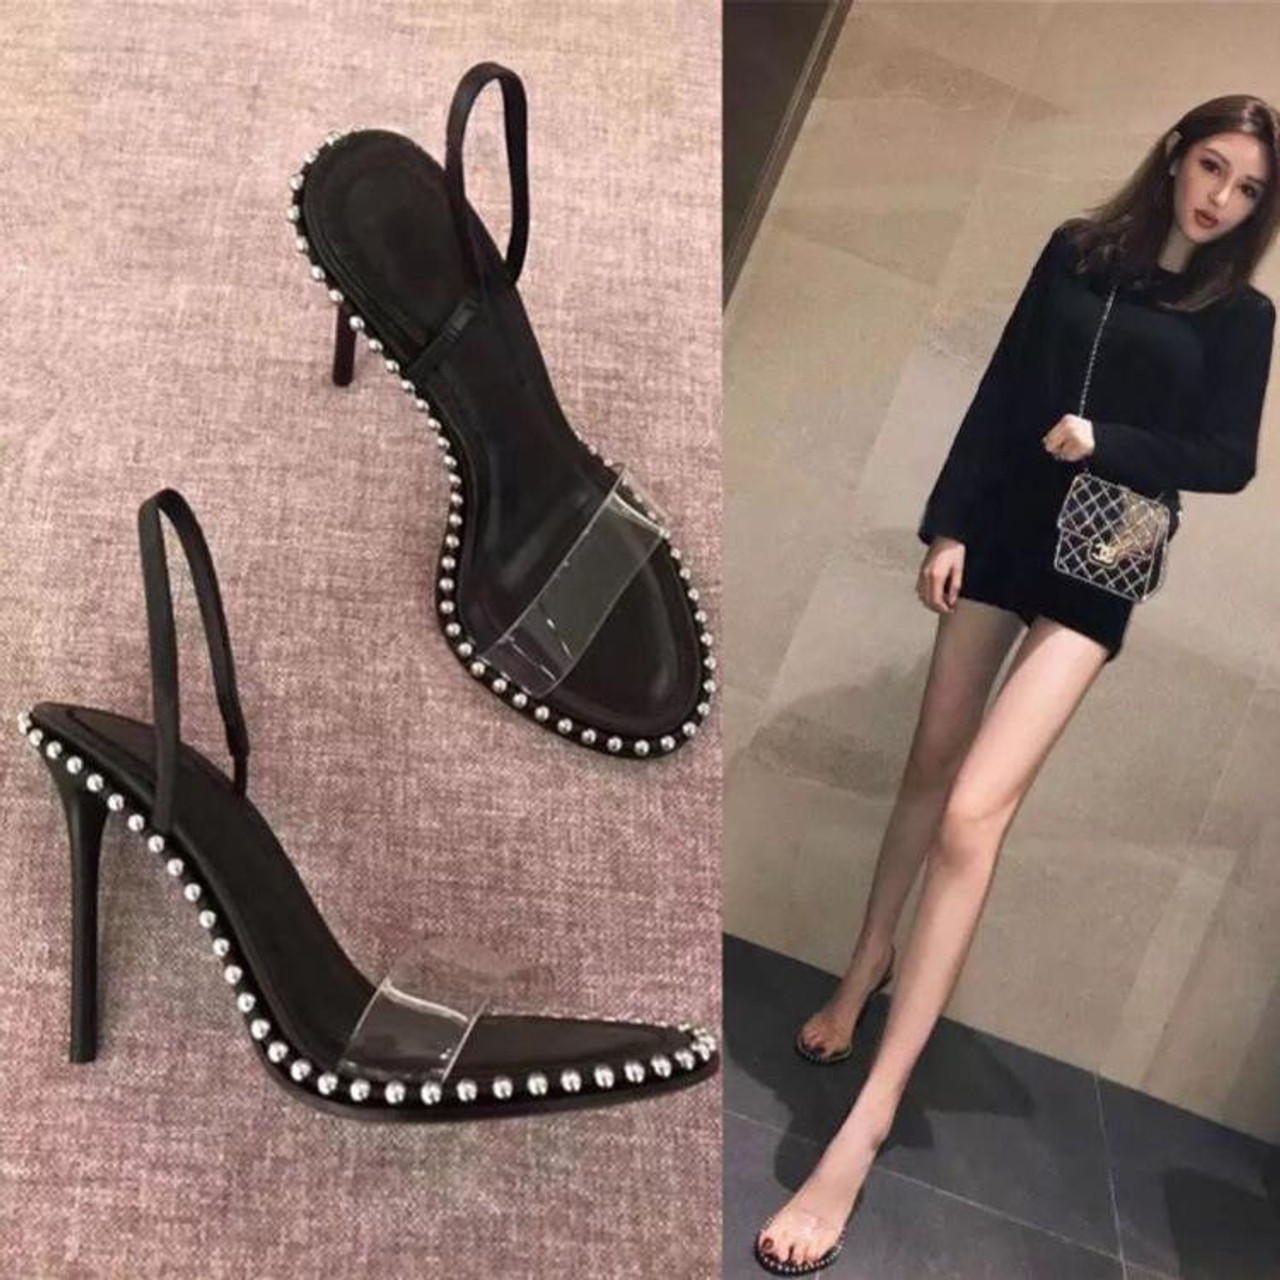 Ladies Small Size Lace Up High Heels Pumps SS85 | Heels, High heel pumps,  Lace up high heels